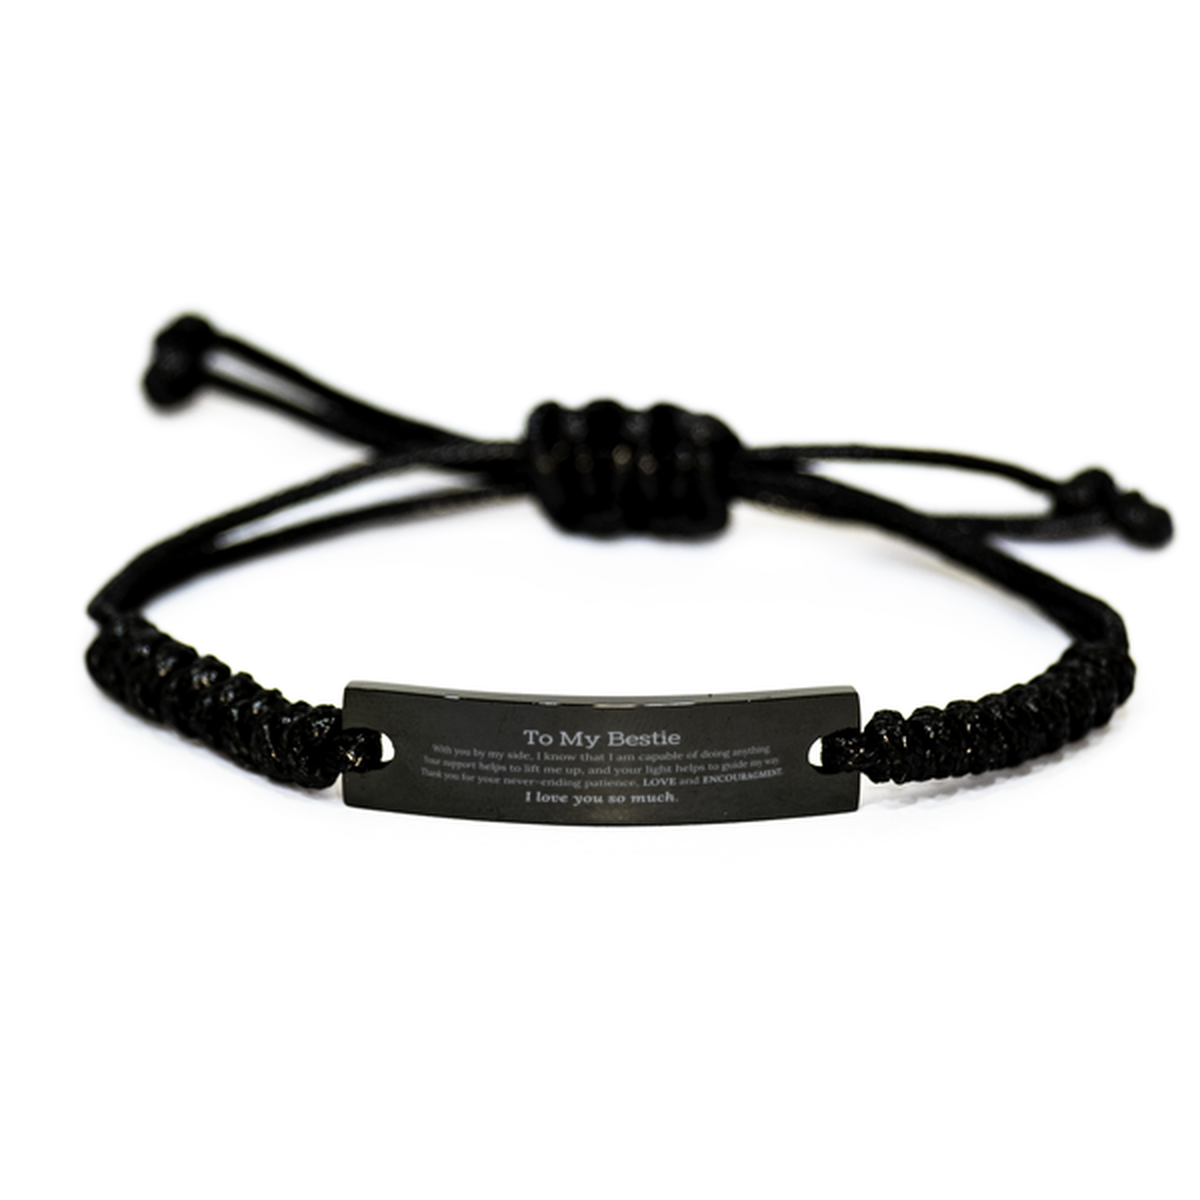 Appreciation Bestie Black Rope Bracelet Gifts, To My Bestie Birthday Christmas Wedding Keepsake Gifts for Bestie With you by my side, I know that I am capable of doing anything. I love you so much